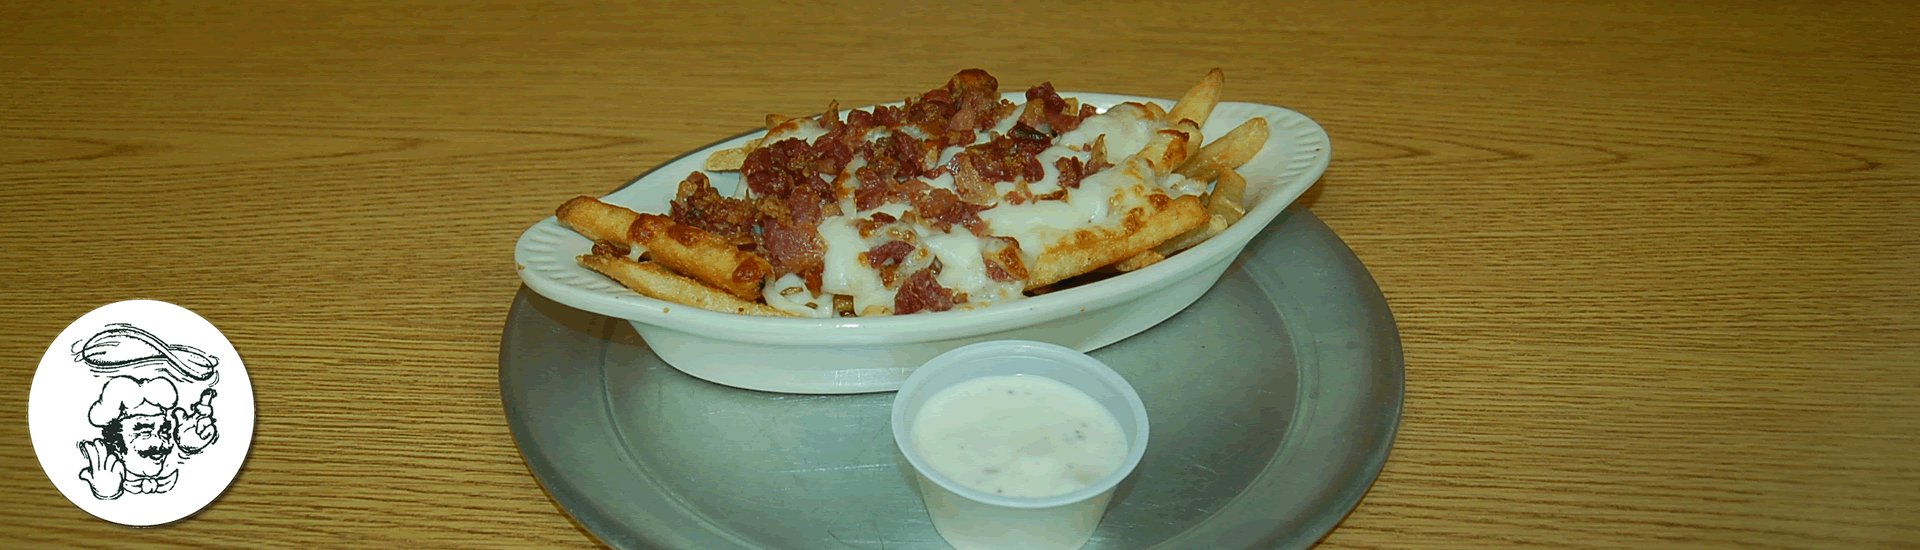 Bella Pizza Clifton Forge VA fries cheese bacon